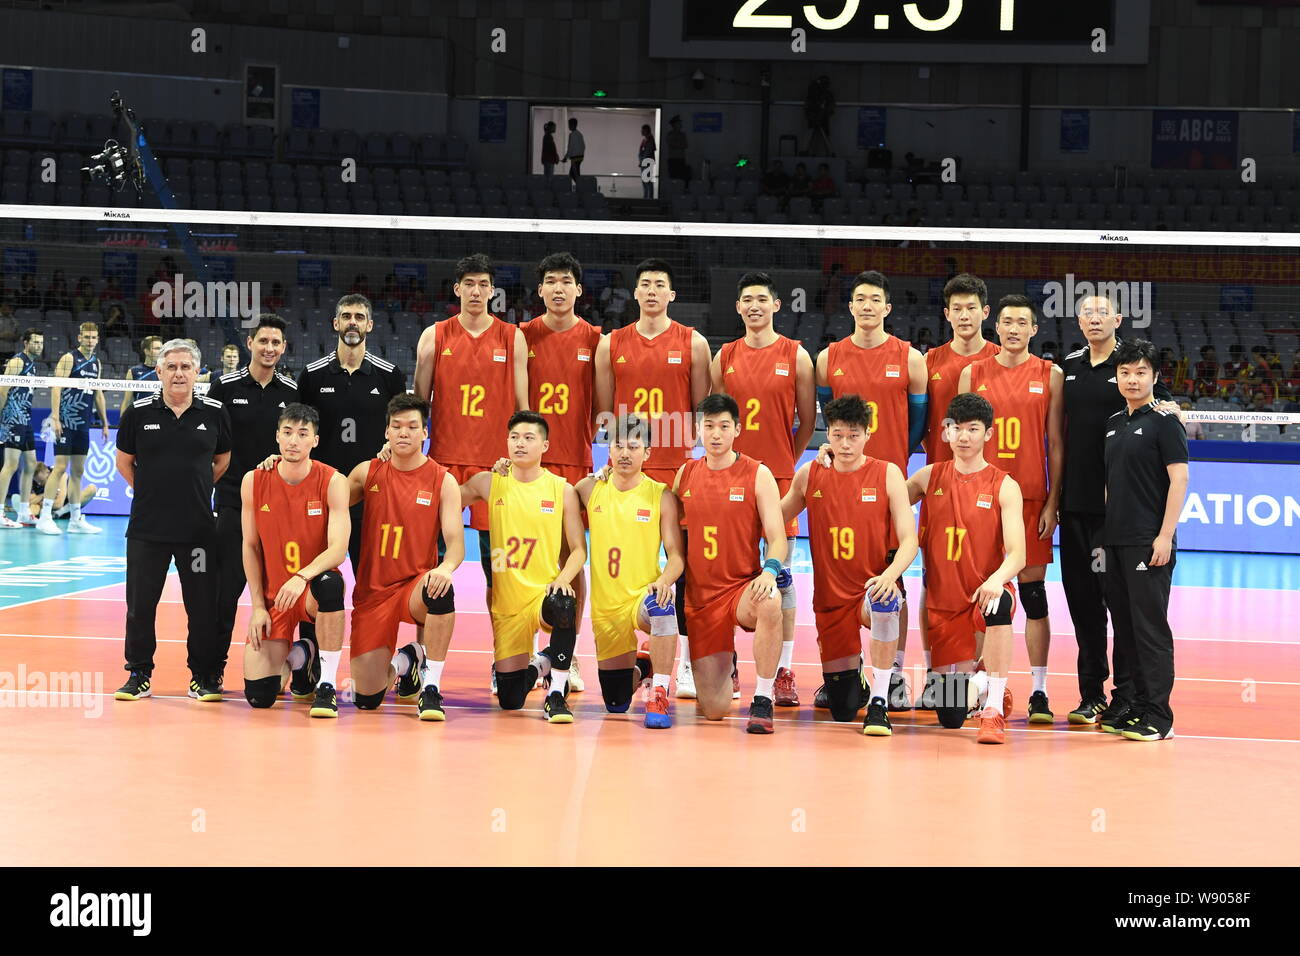 China men's national volleyball team pose to photo before the Tokyo 2020 Olympics volleyball qualification against Finland in Ningbo city, east China's Zhejiang province, 3 August 2019. China won the match against Finland 3-1 at Tokyo 2020 Olympics volleyball qualification in Ningbo city, east China's Zhejiang province, 3 August 2019. Stock Photo